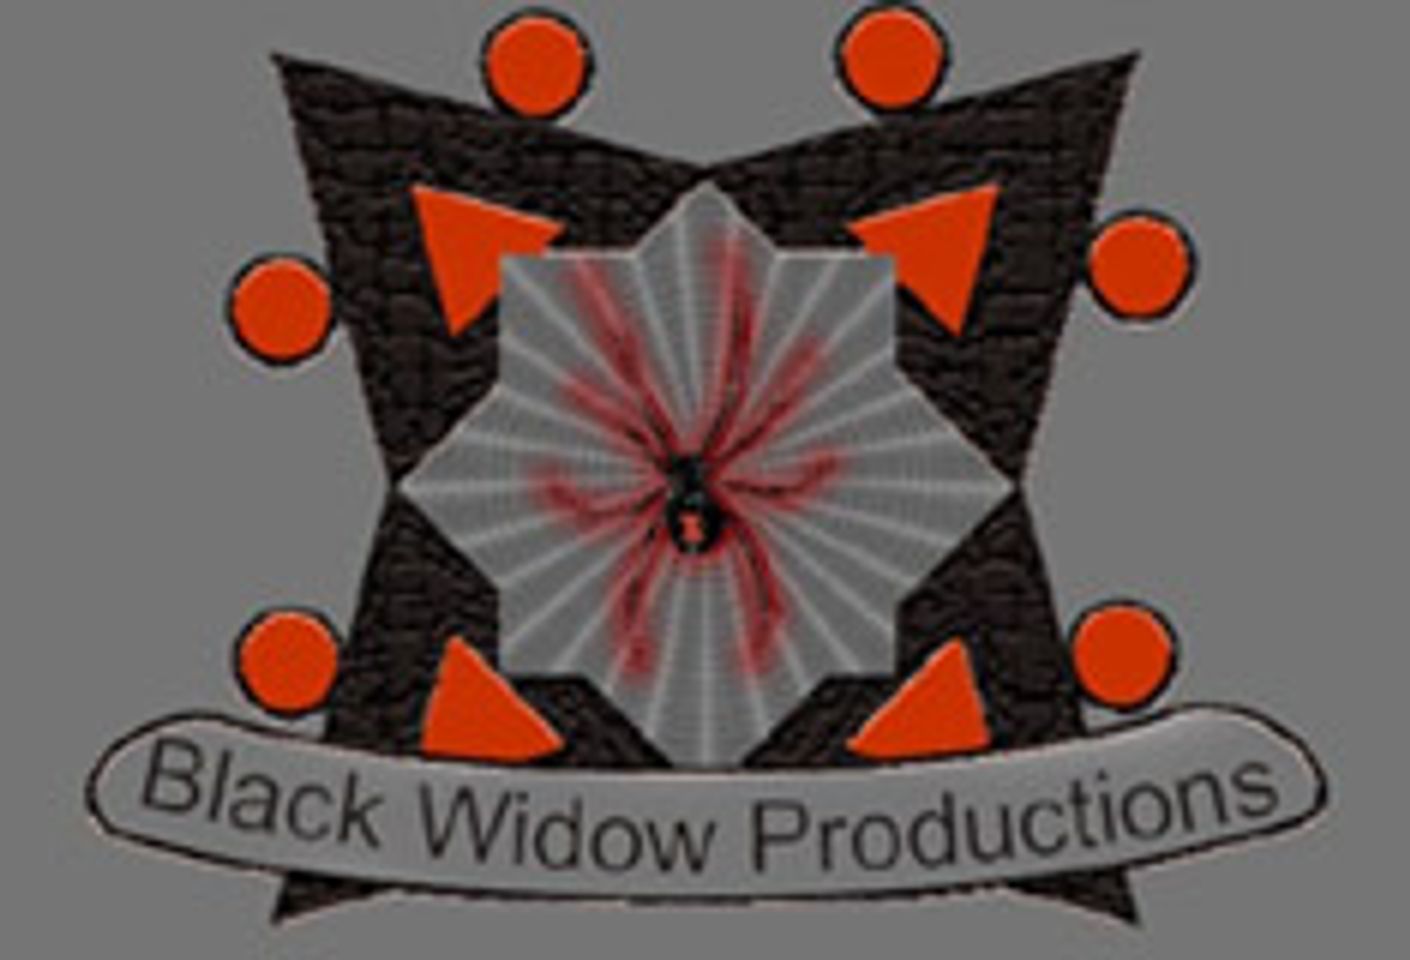 Black Widow Relocates to Accommodate Demand for GGG Line